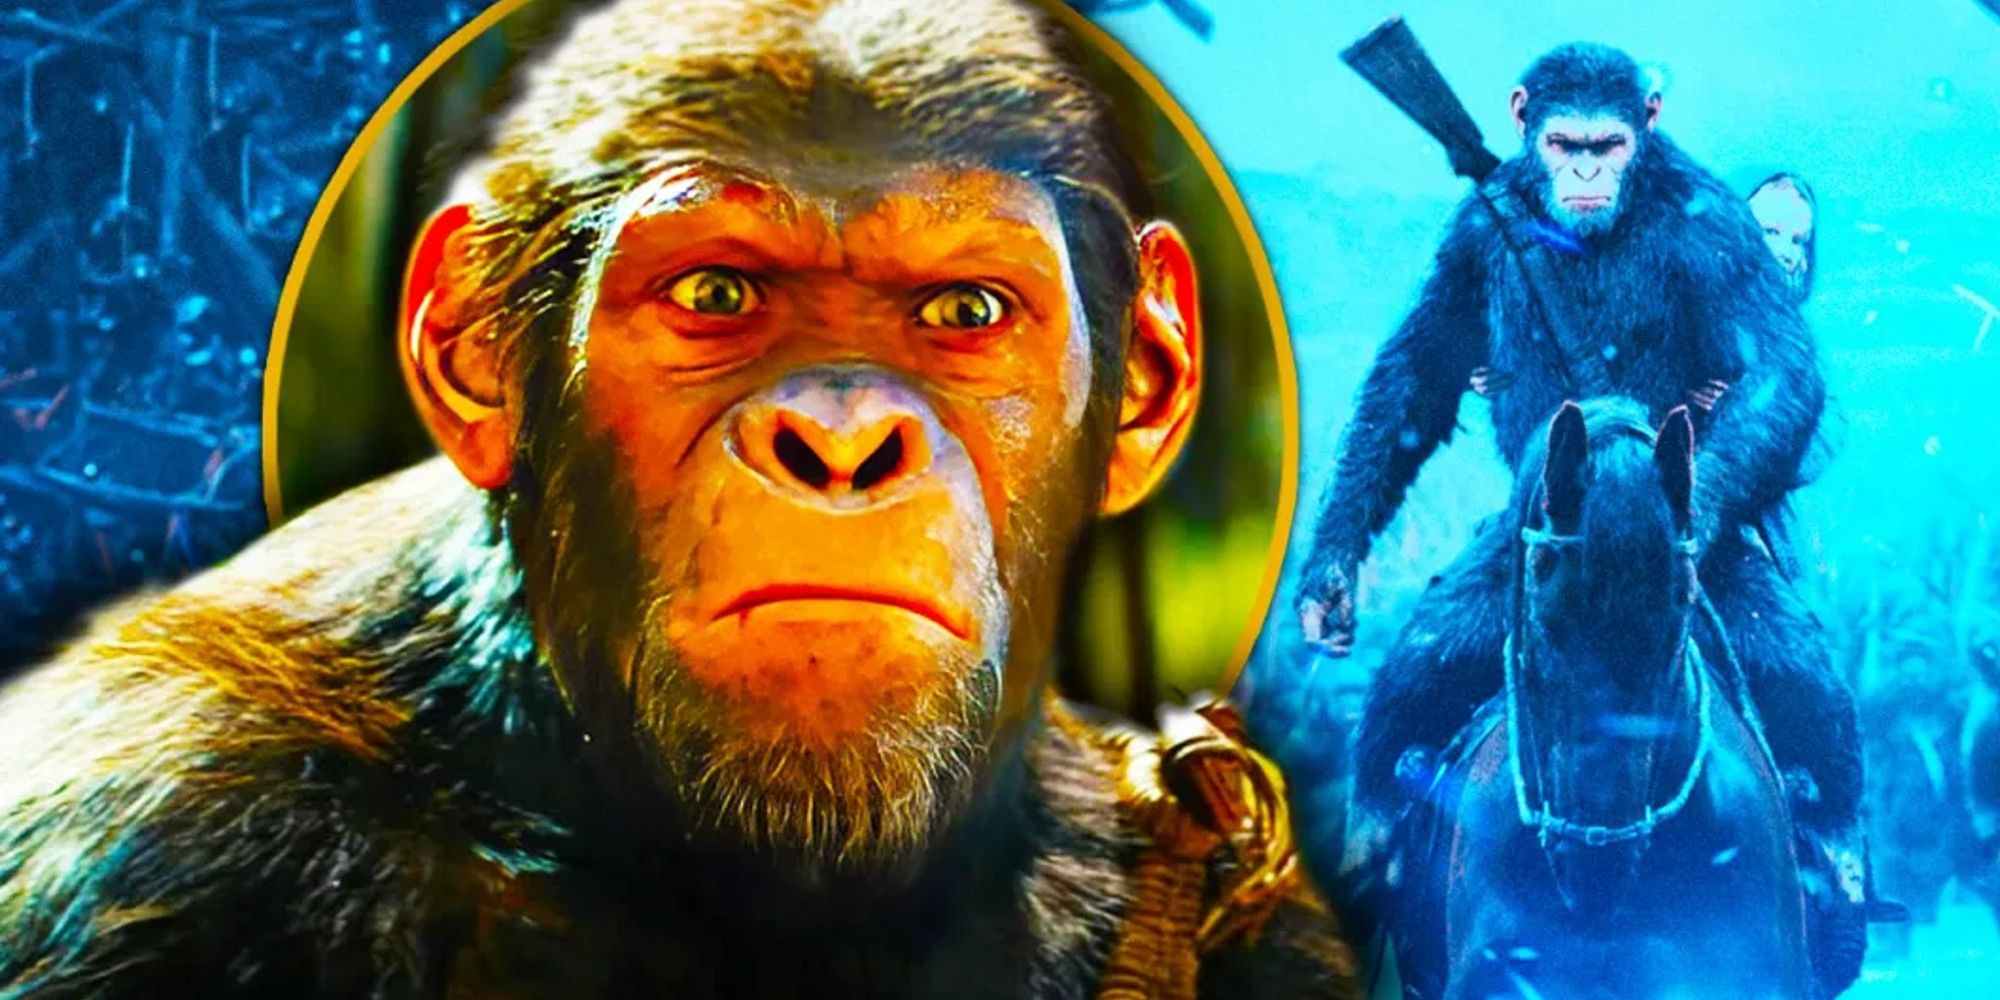 An SR custom image of an ape in Kingdom of the Planet of the Apes alongside the War for the Planet of the Apes poster, depicting an ape atop a horse